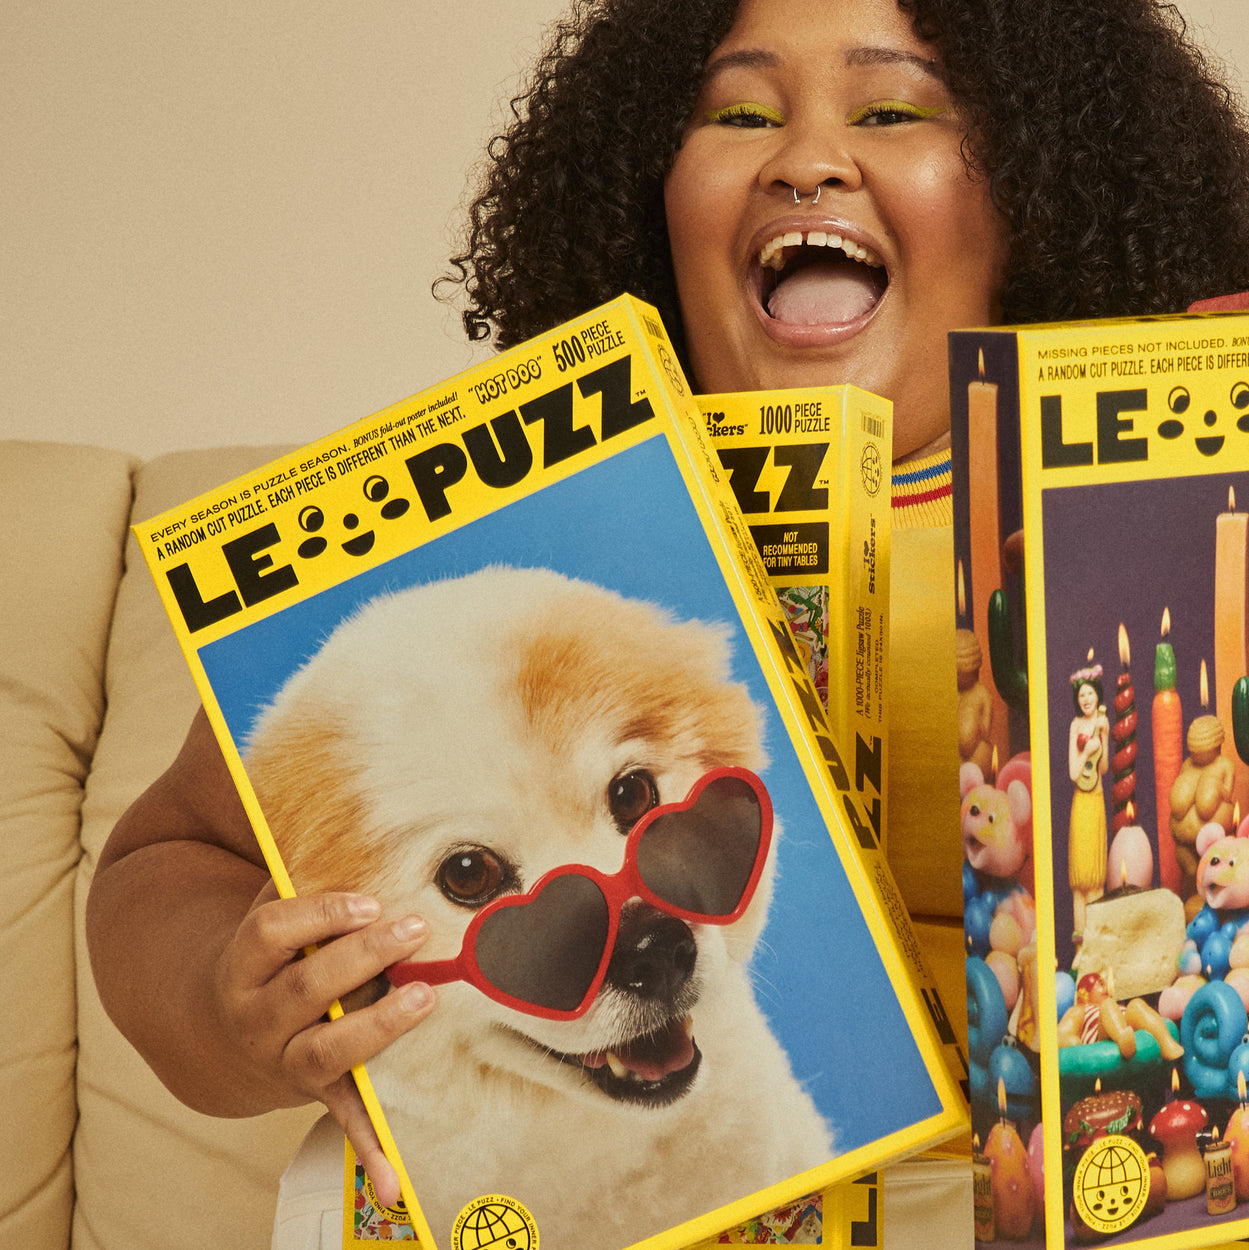 Hot Dog Puzzle | Le Puzz | 500 Pieces: Cream Fluffy Dog with Heart Sunglasses Puzzle. Hot Dog features our furry fwend Bucky! When we met Bucky we knew he’d make a perfect puzzle pal. He stole our hearts with his teeny grin and heart shaped sunglasses.